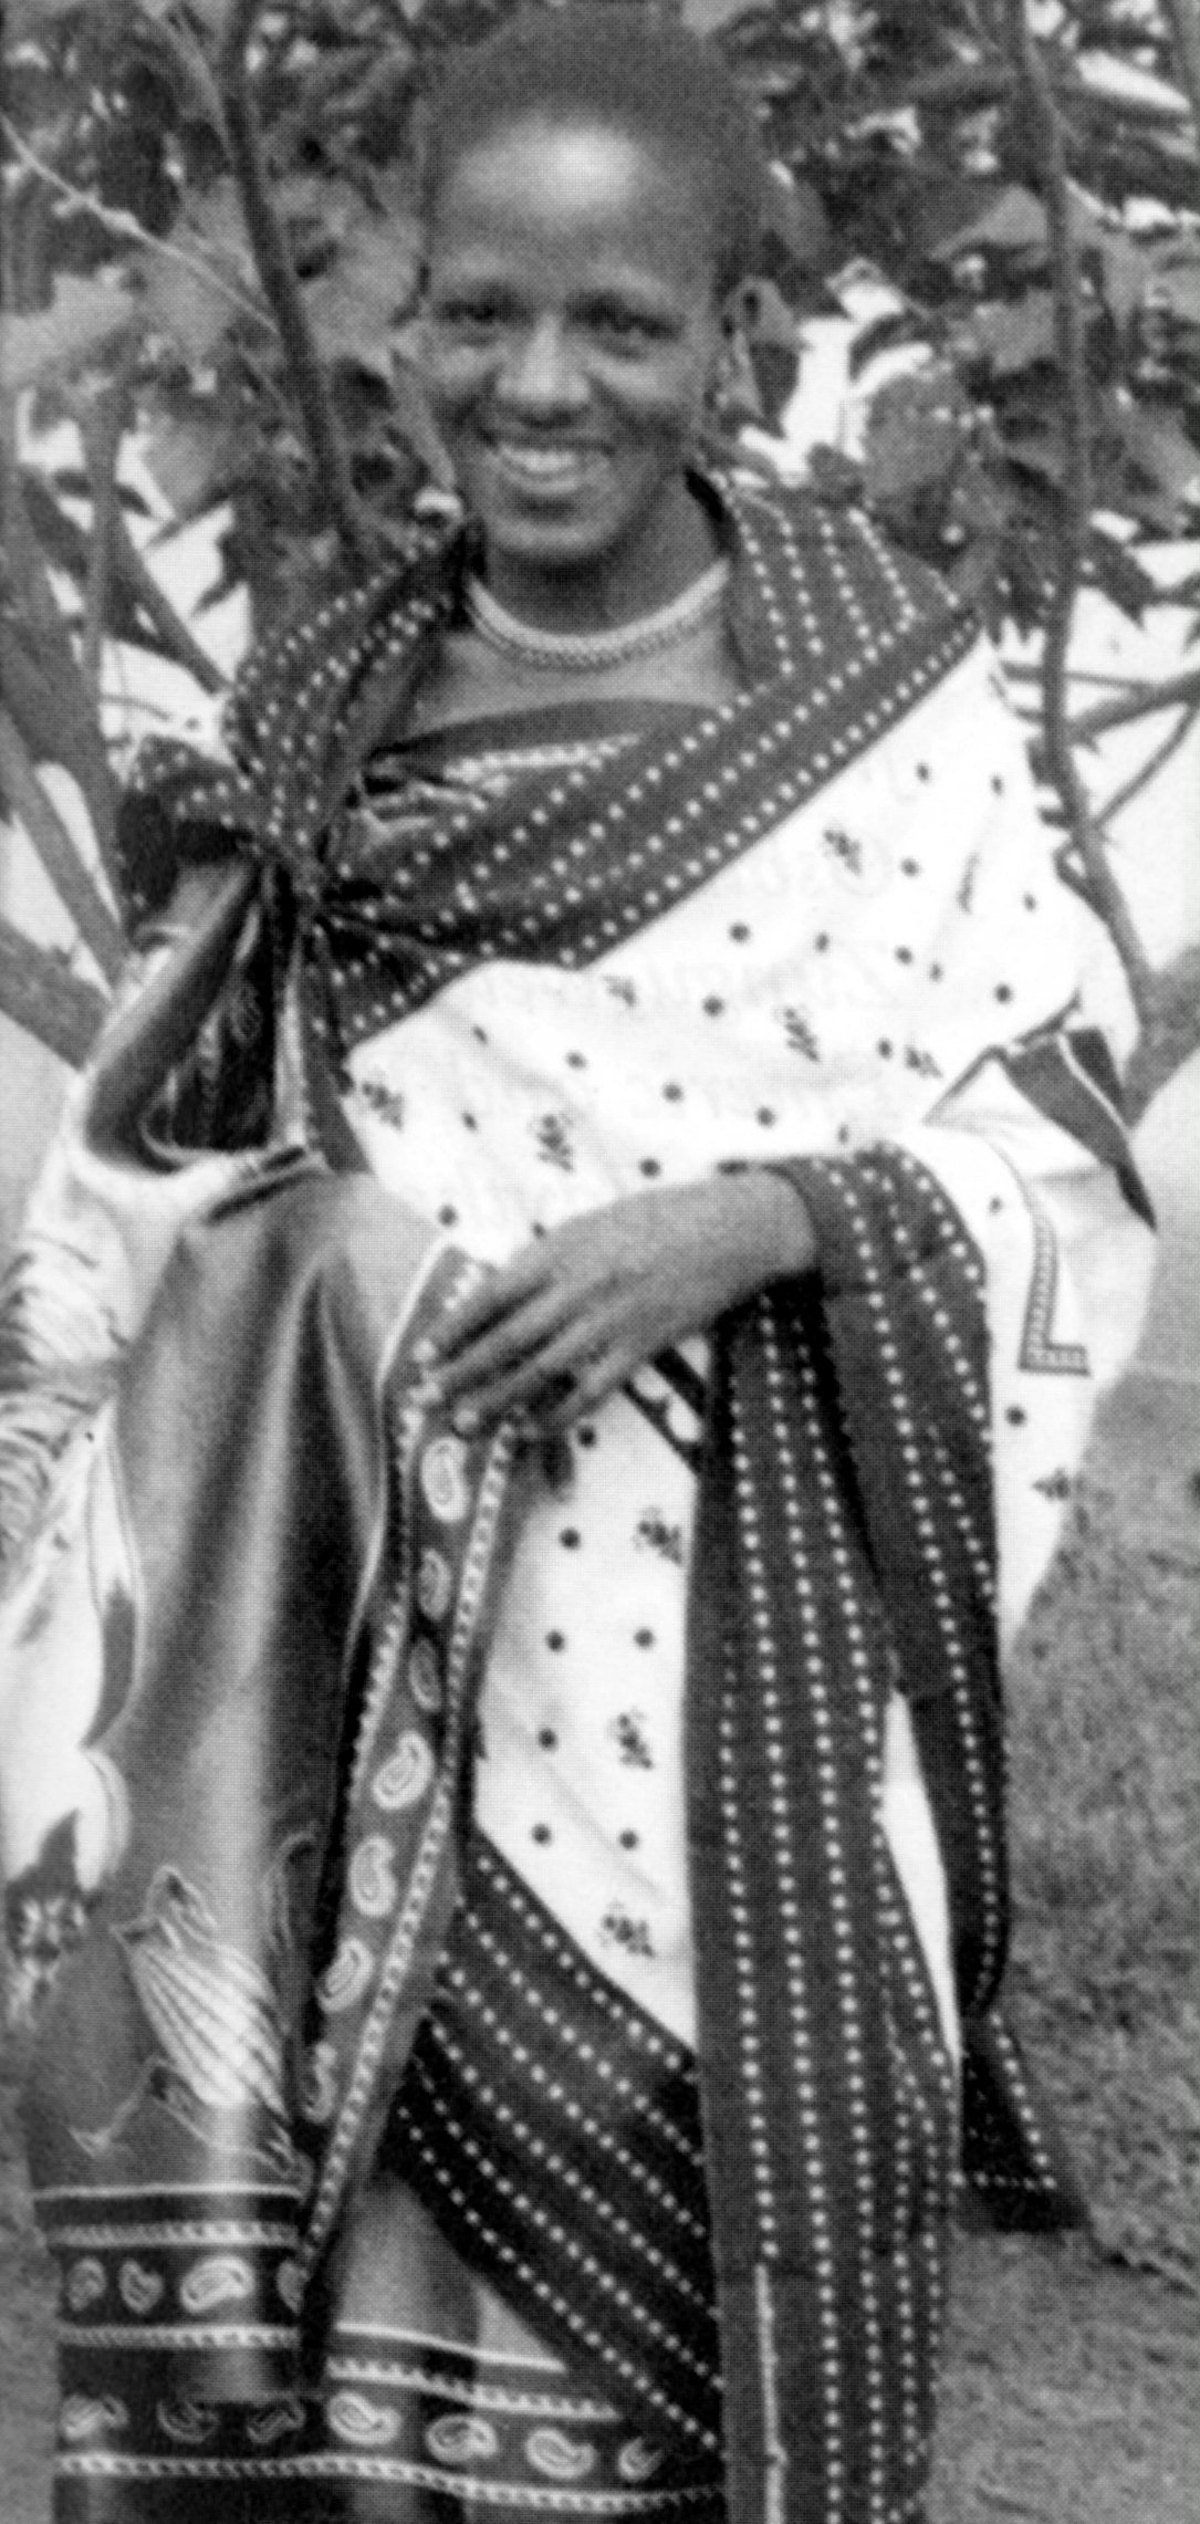 Princess Gcinaphi. Photo courtesy of "Heroes and Heroines of the Ten Year Crusade in Southern Africa," compiled by Lowell Johnson and Edith Johnson. Baha'i Publishing Trust, Johannesburg.